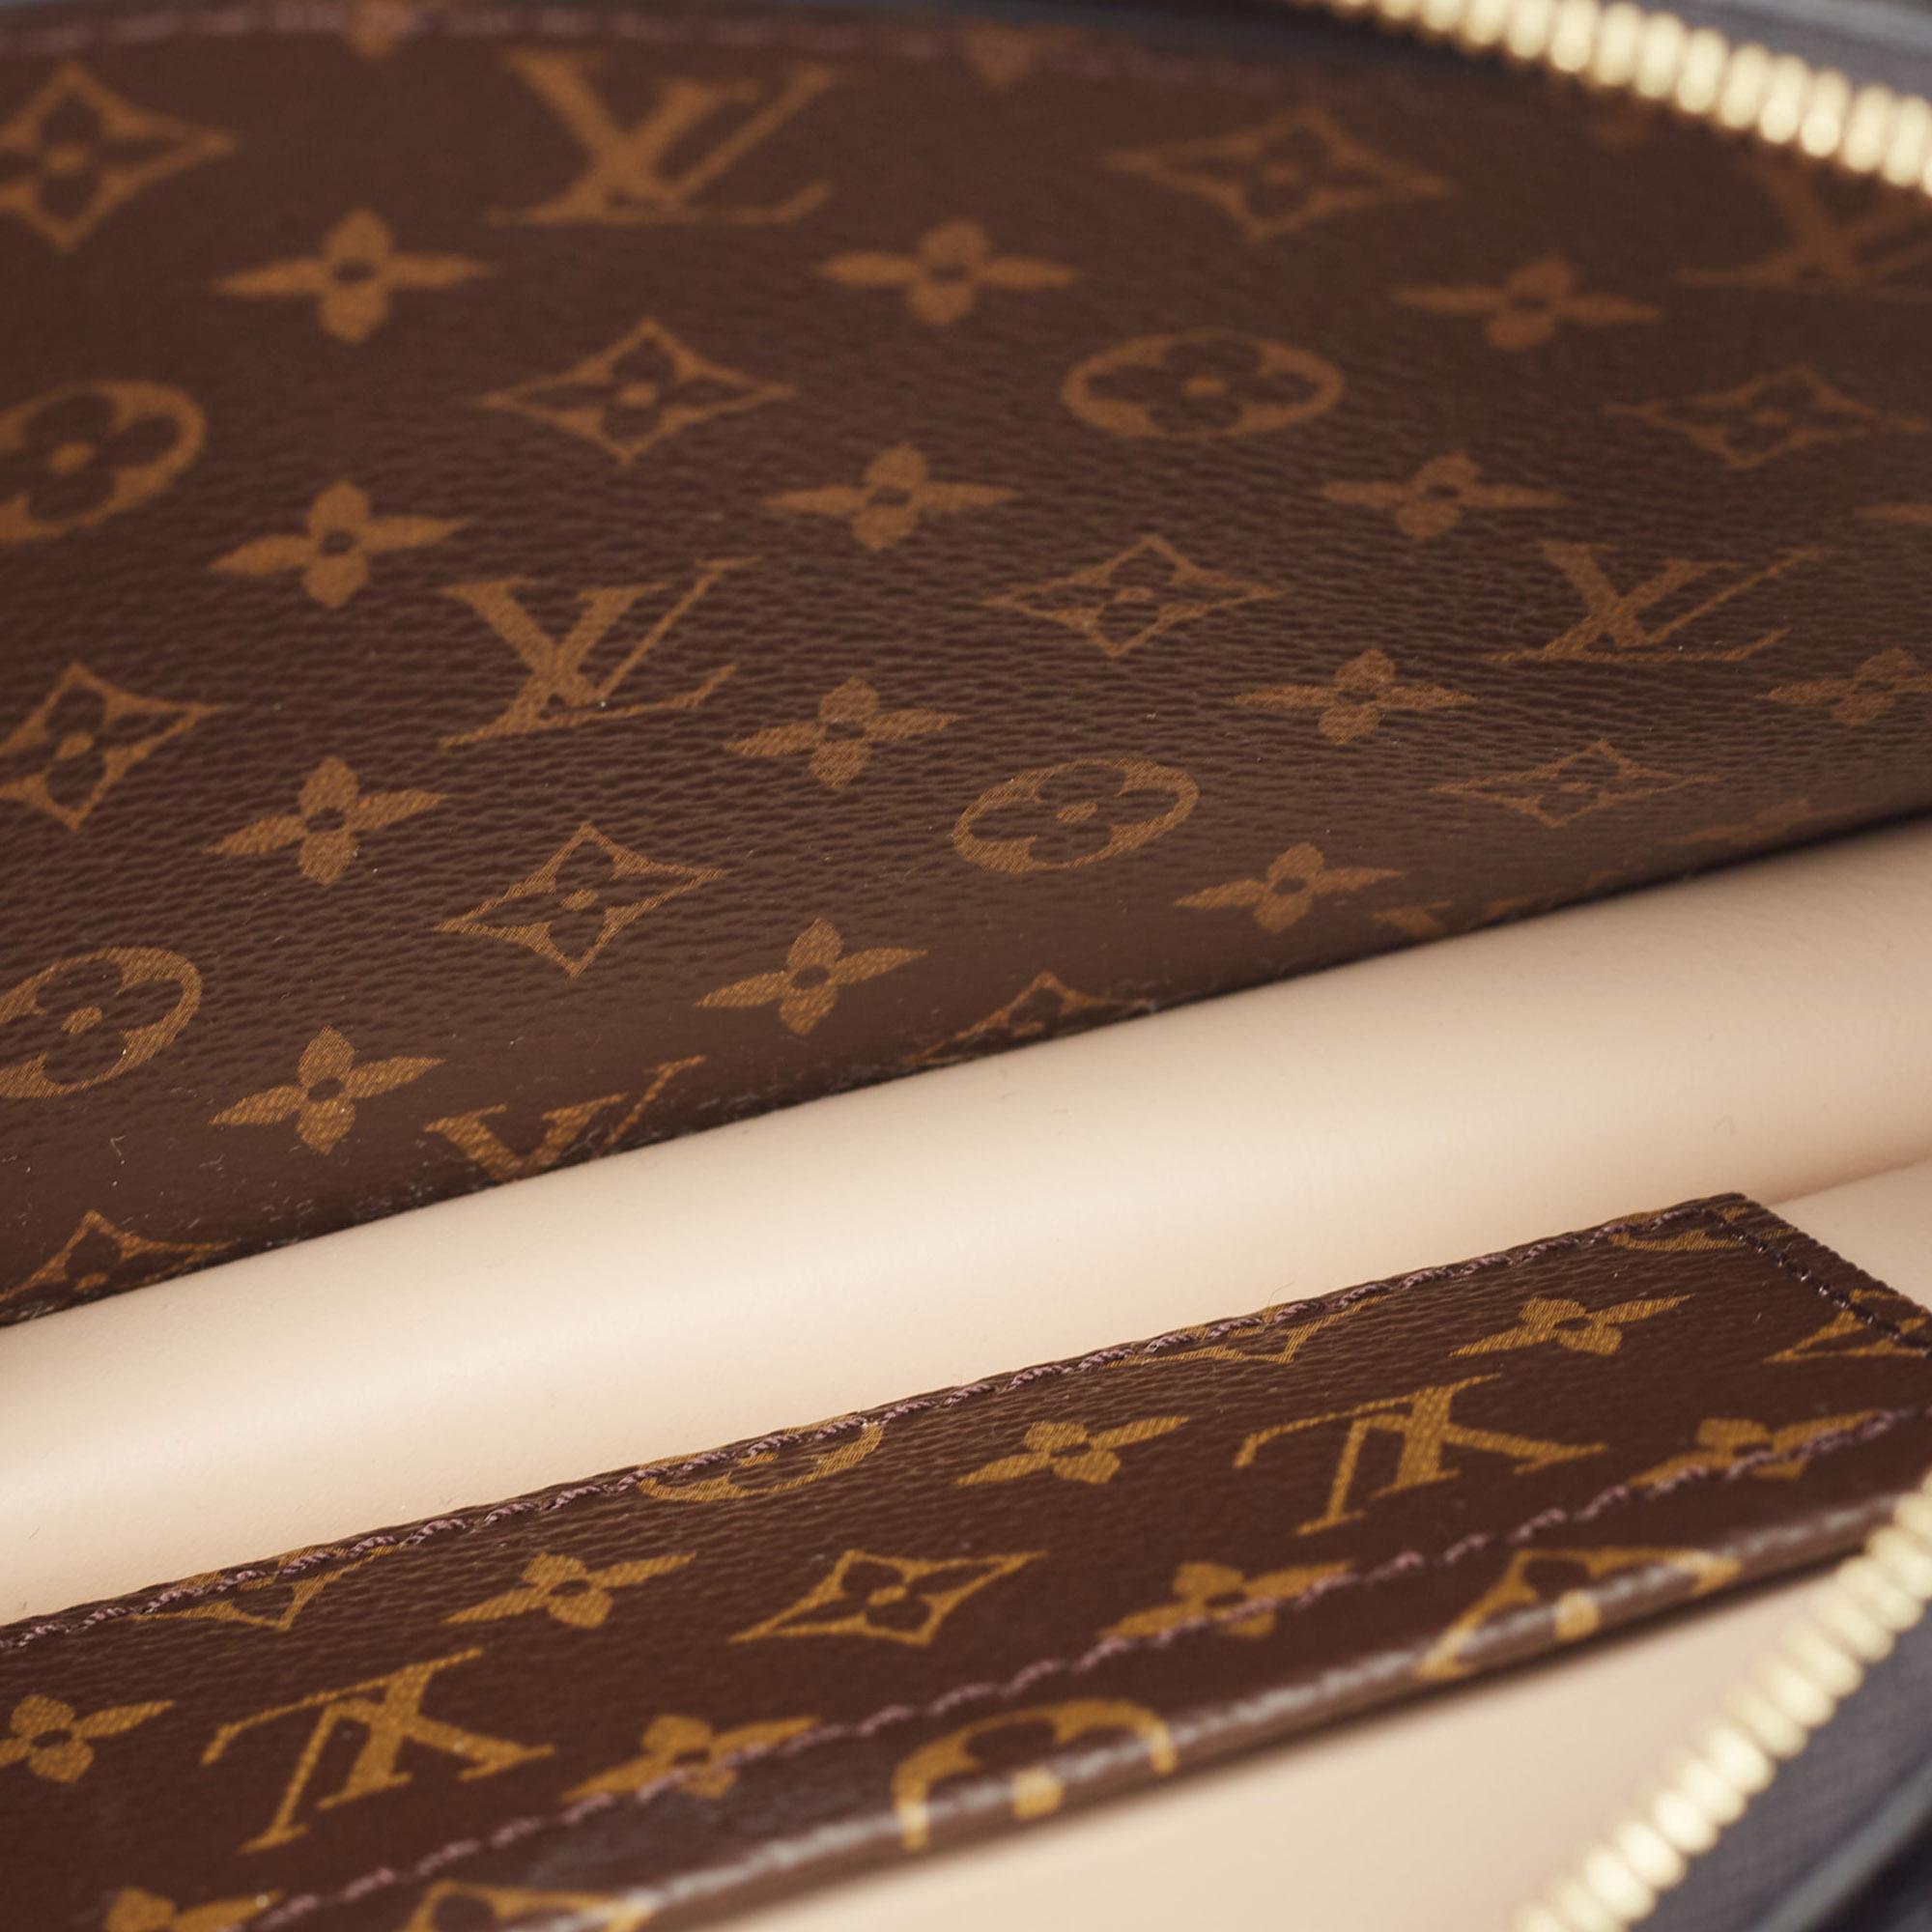 Ensure your day's essentials are in order and your outfit is complete with this LV Trunk clutch bag. Crafted using the best materials, the bag carries the maison's signature of artful craftsmanship and enduring appeal.

